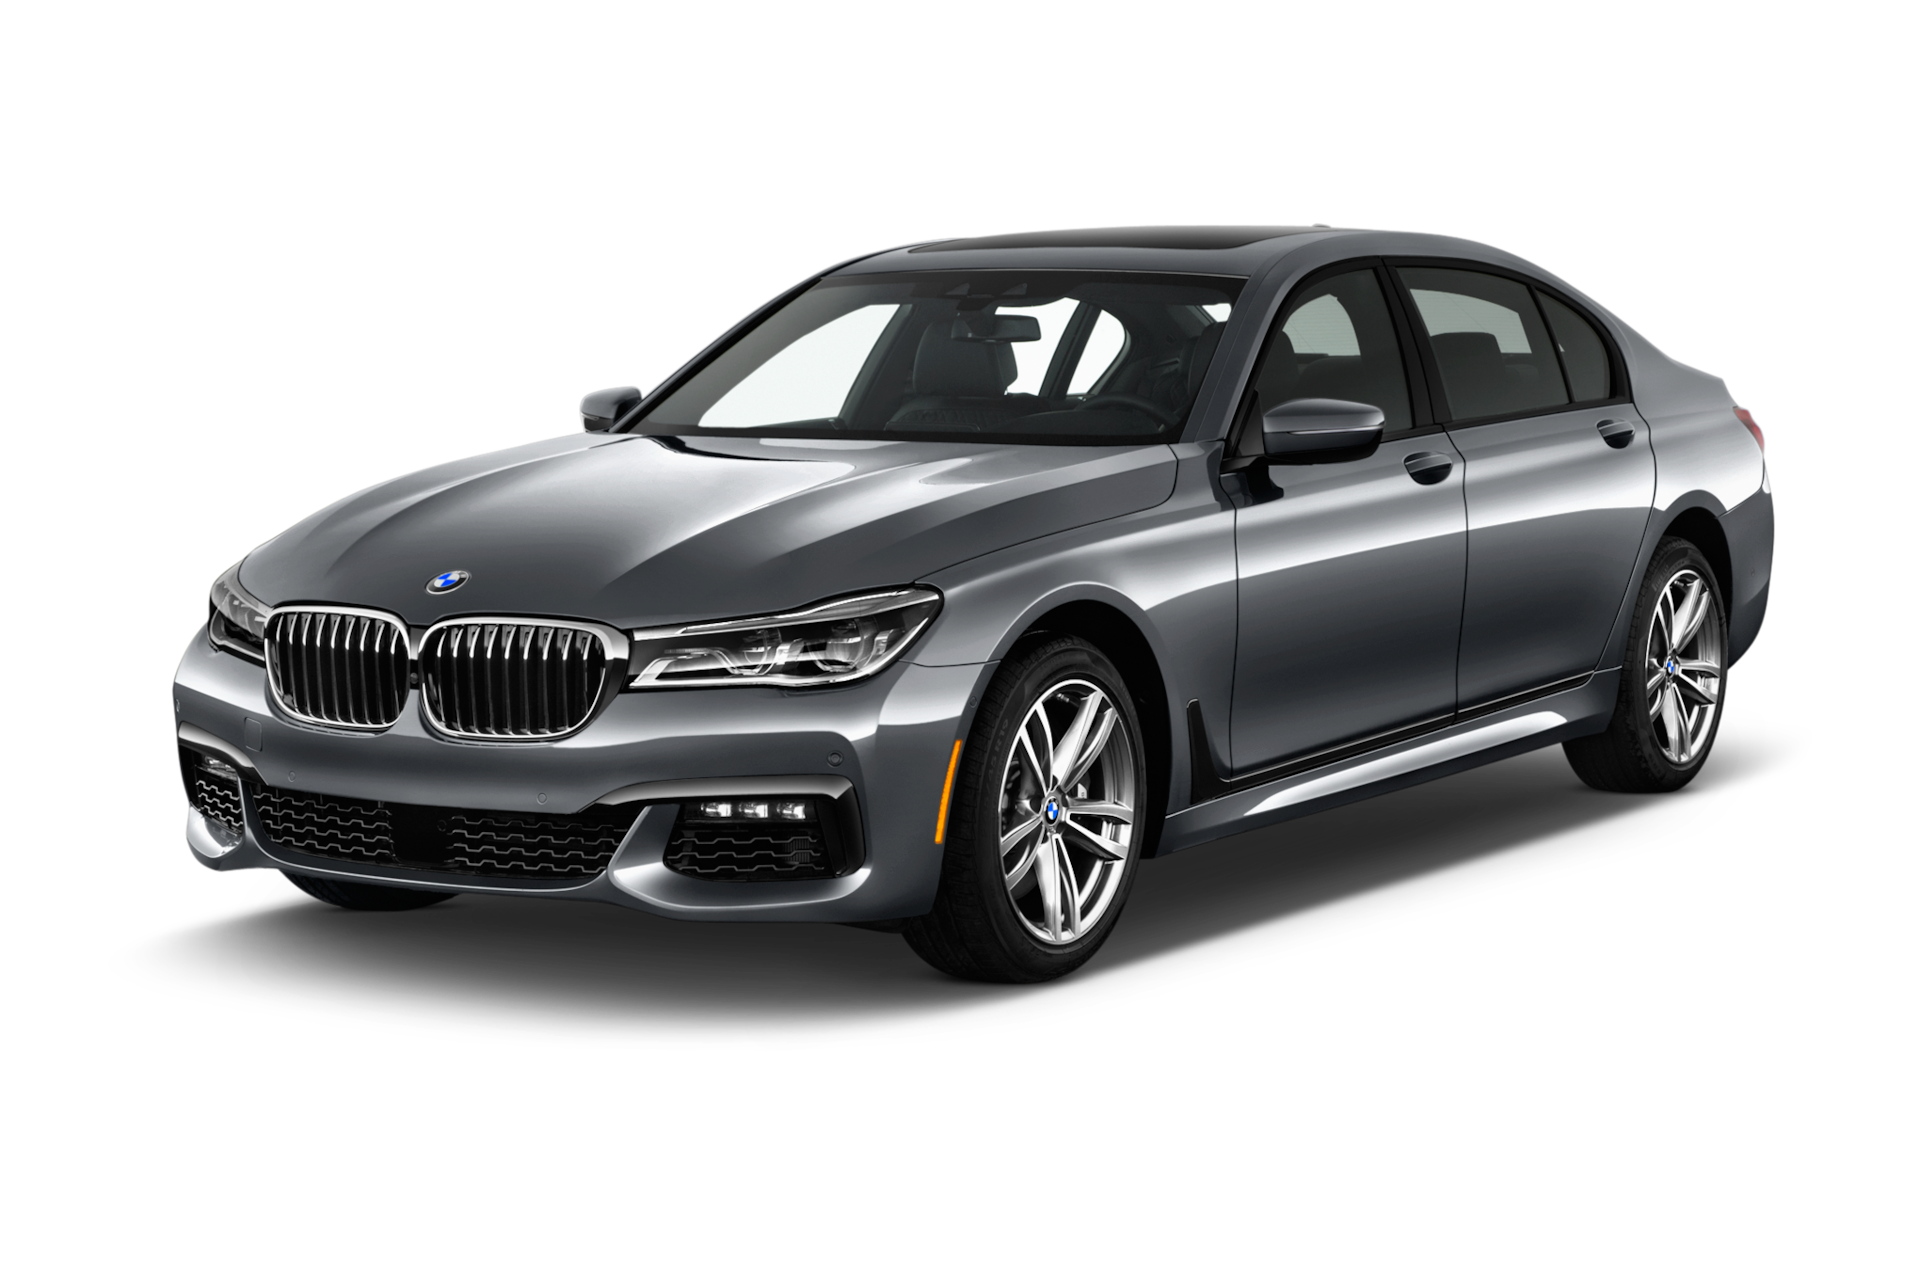 2017 BMW 7-Series Prices, Reviews, and Photos - MotorTrend